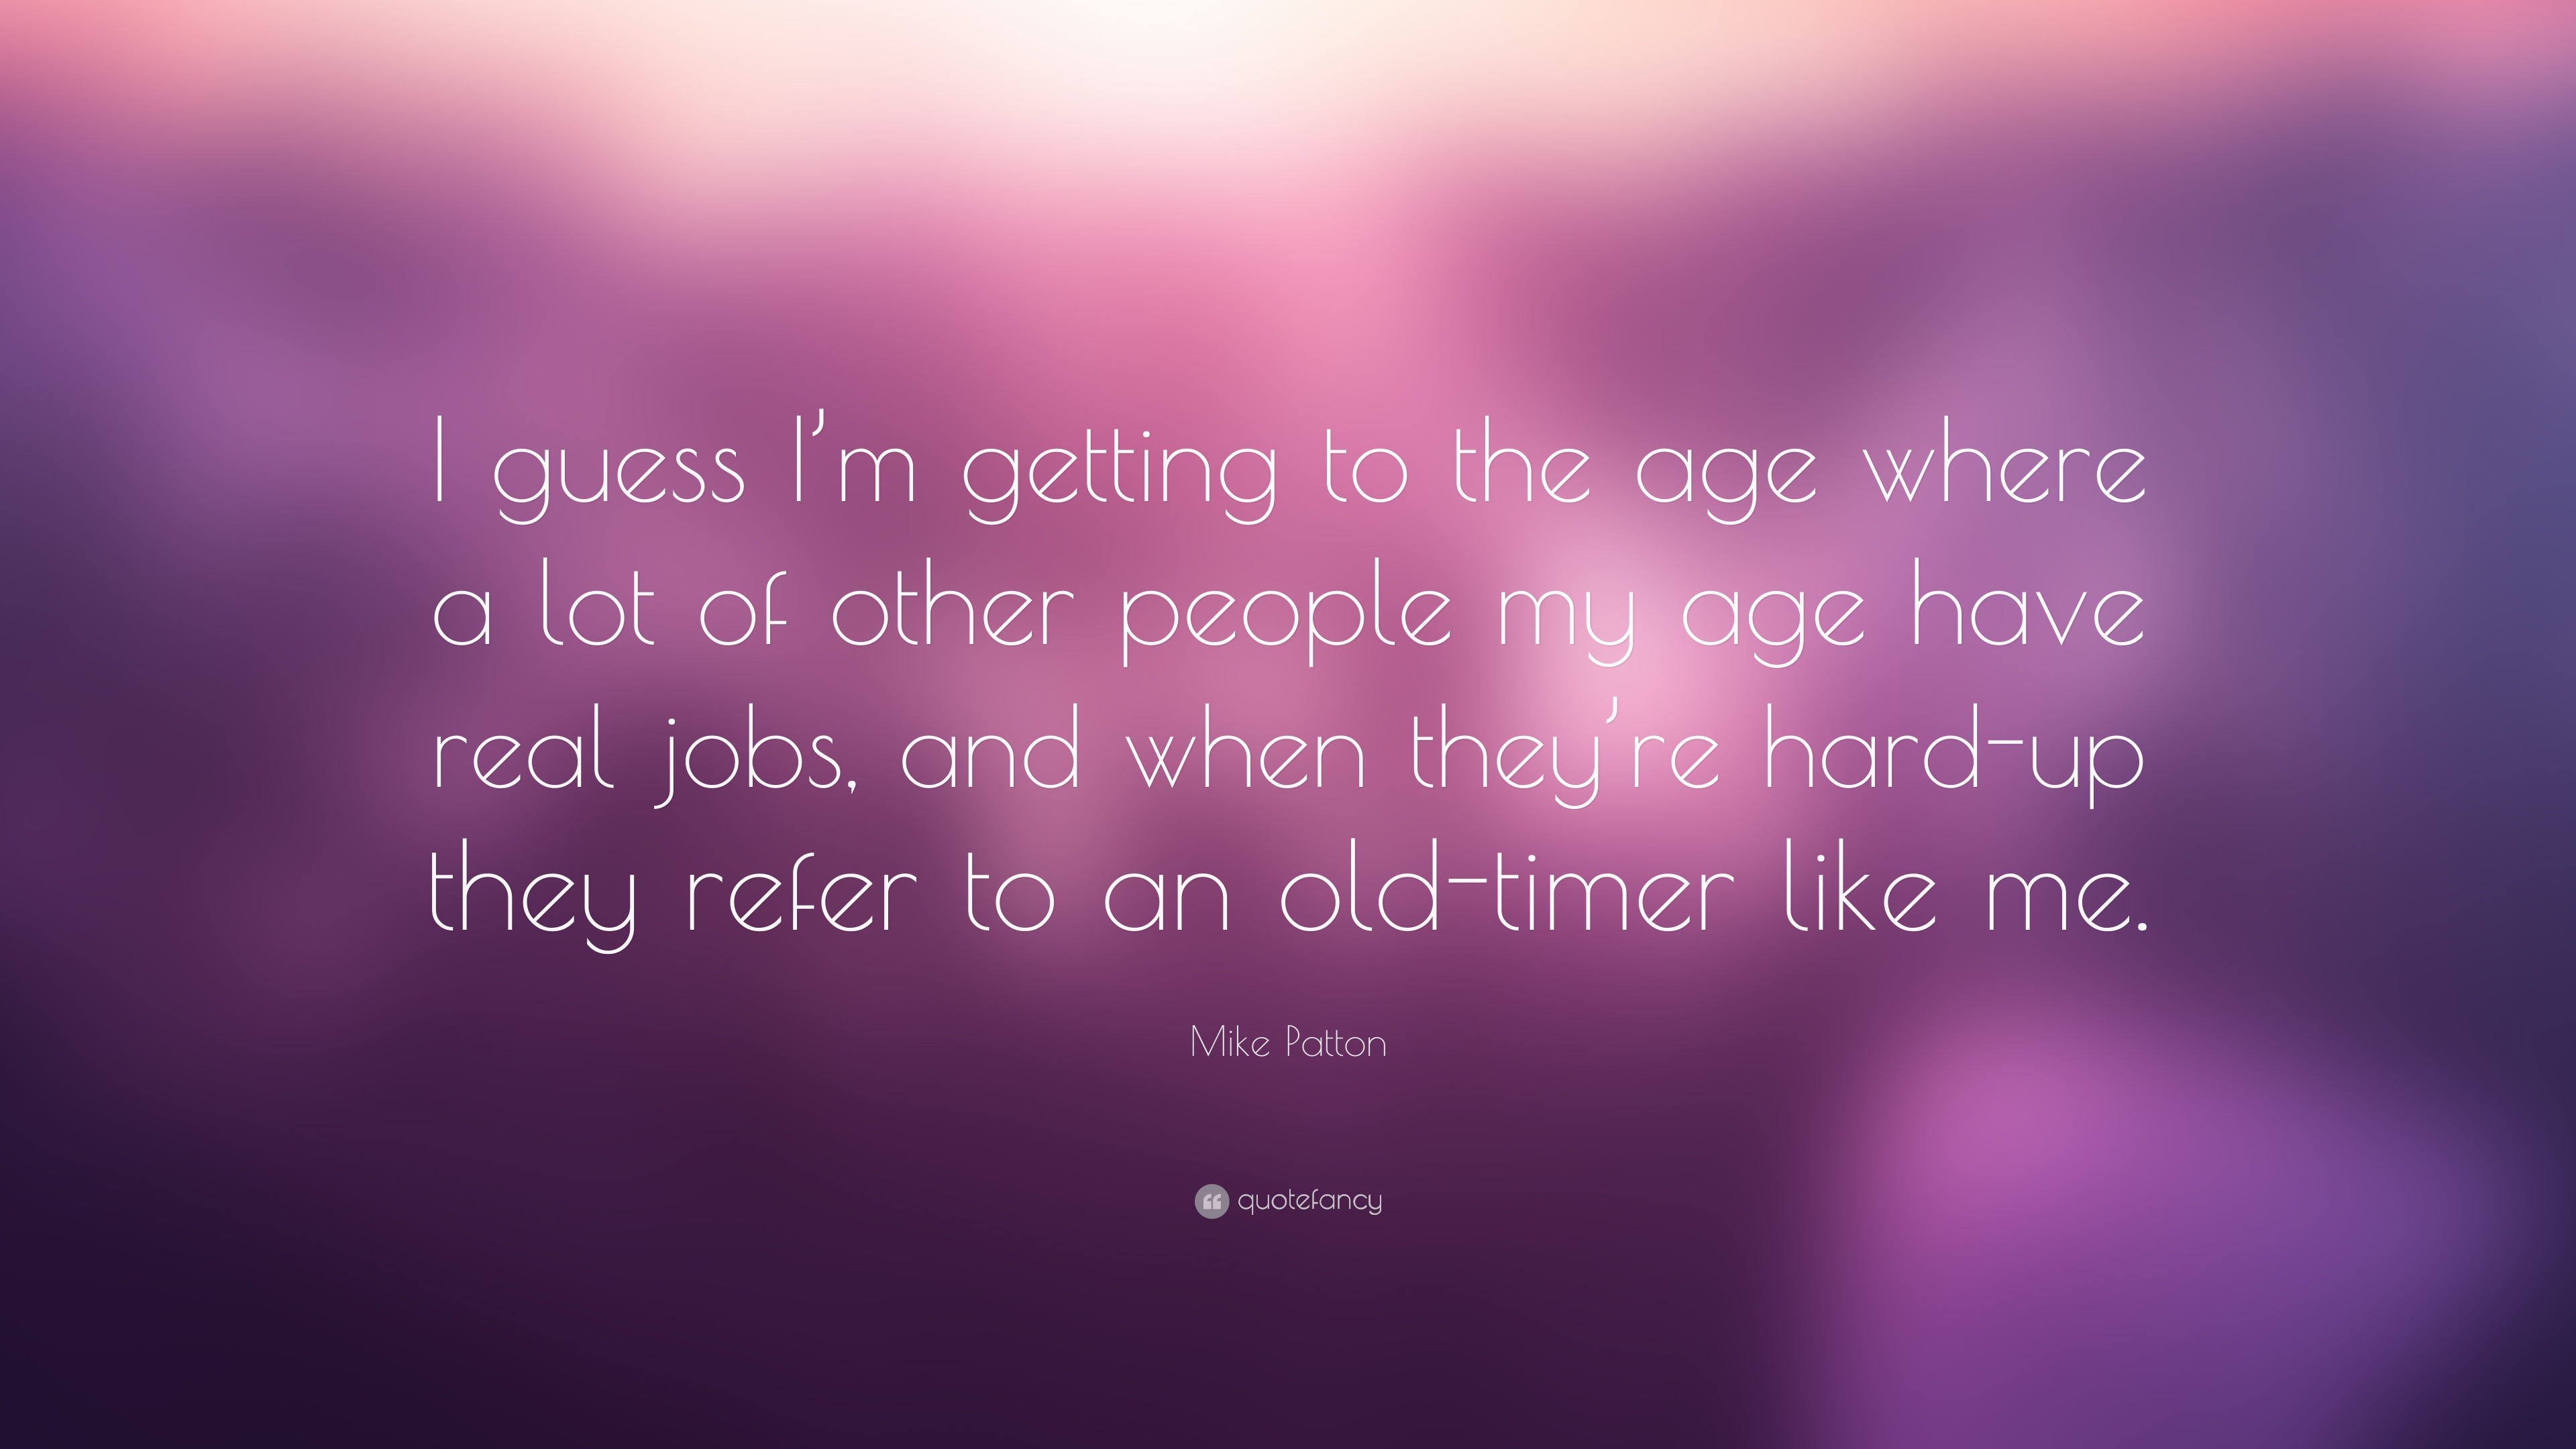 Mike Patton Quote: “I guess I'm getting to the age where a lot of other people my age have real jobs, and when they refer to...”